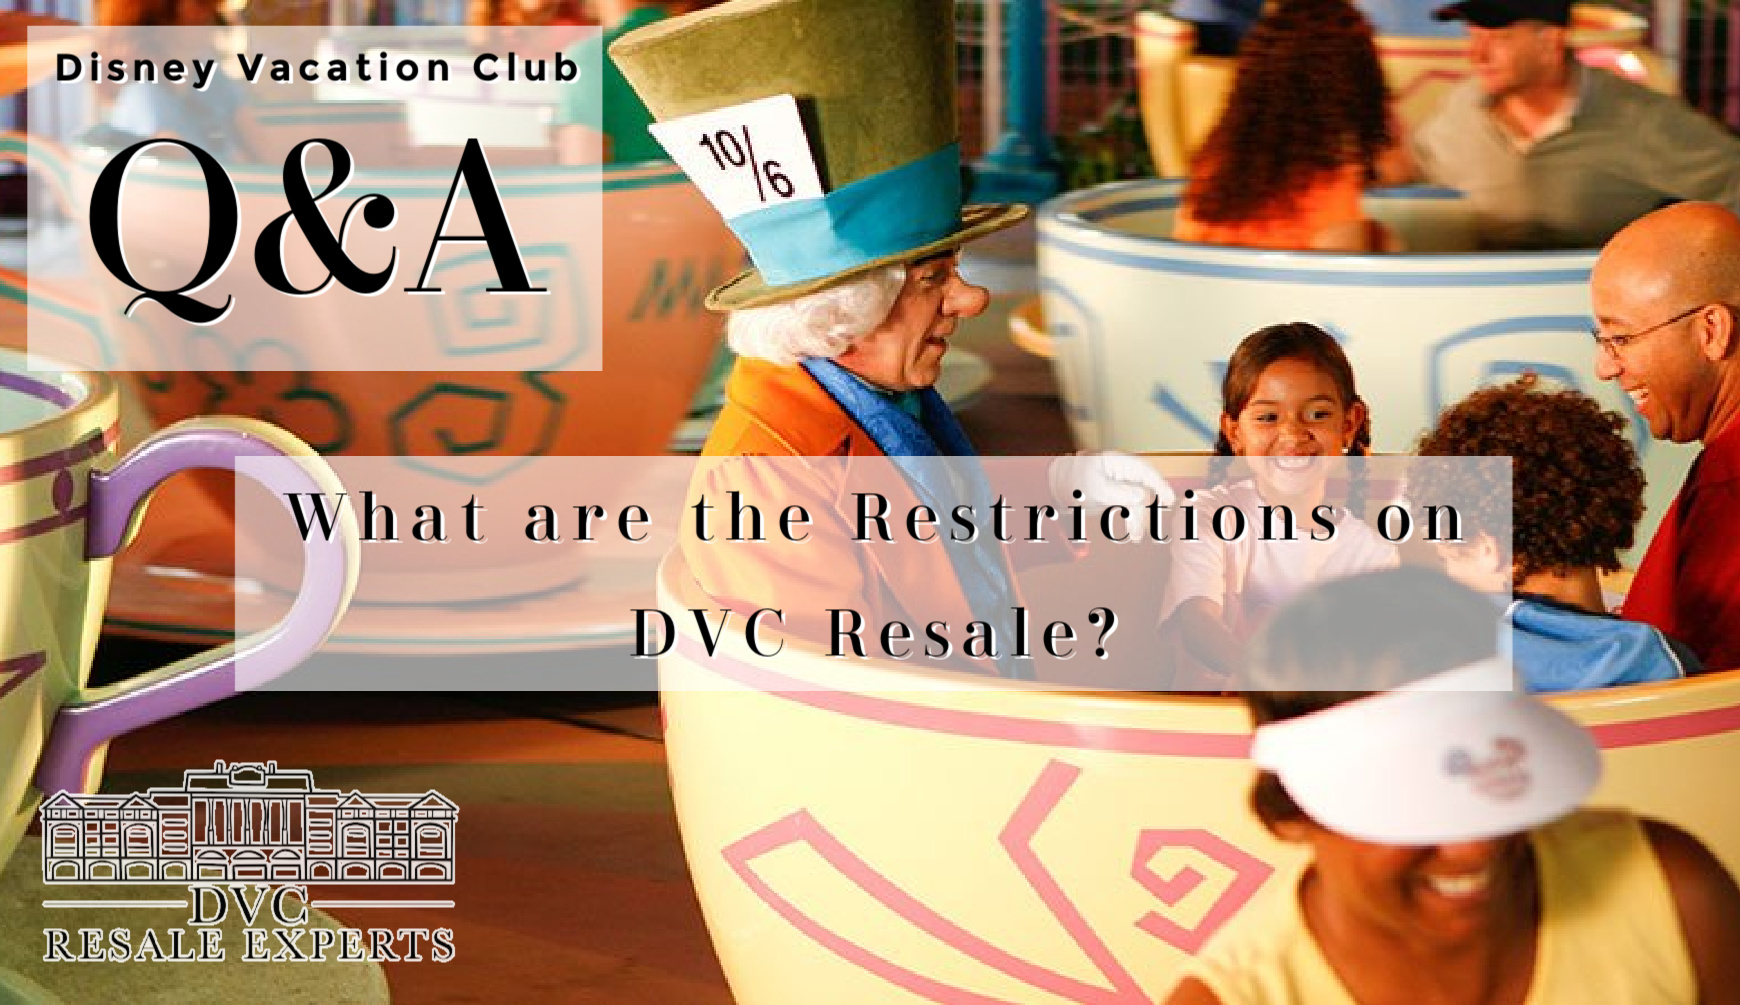 What are the Restrictions on DVC Resale